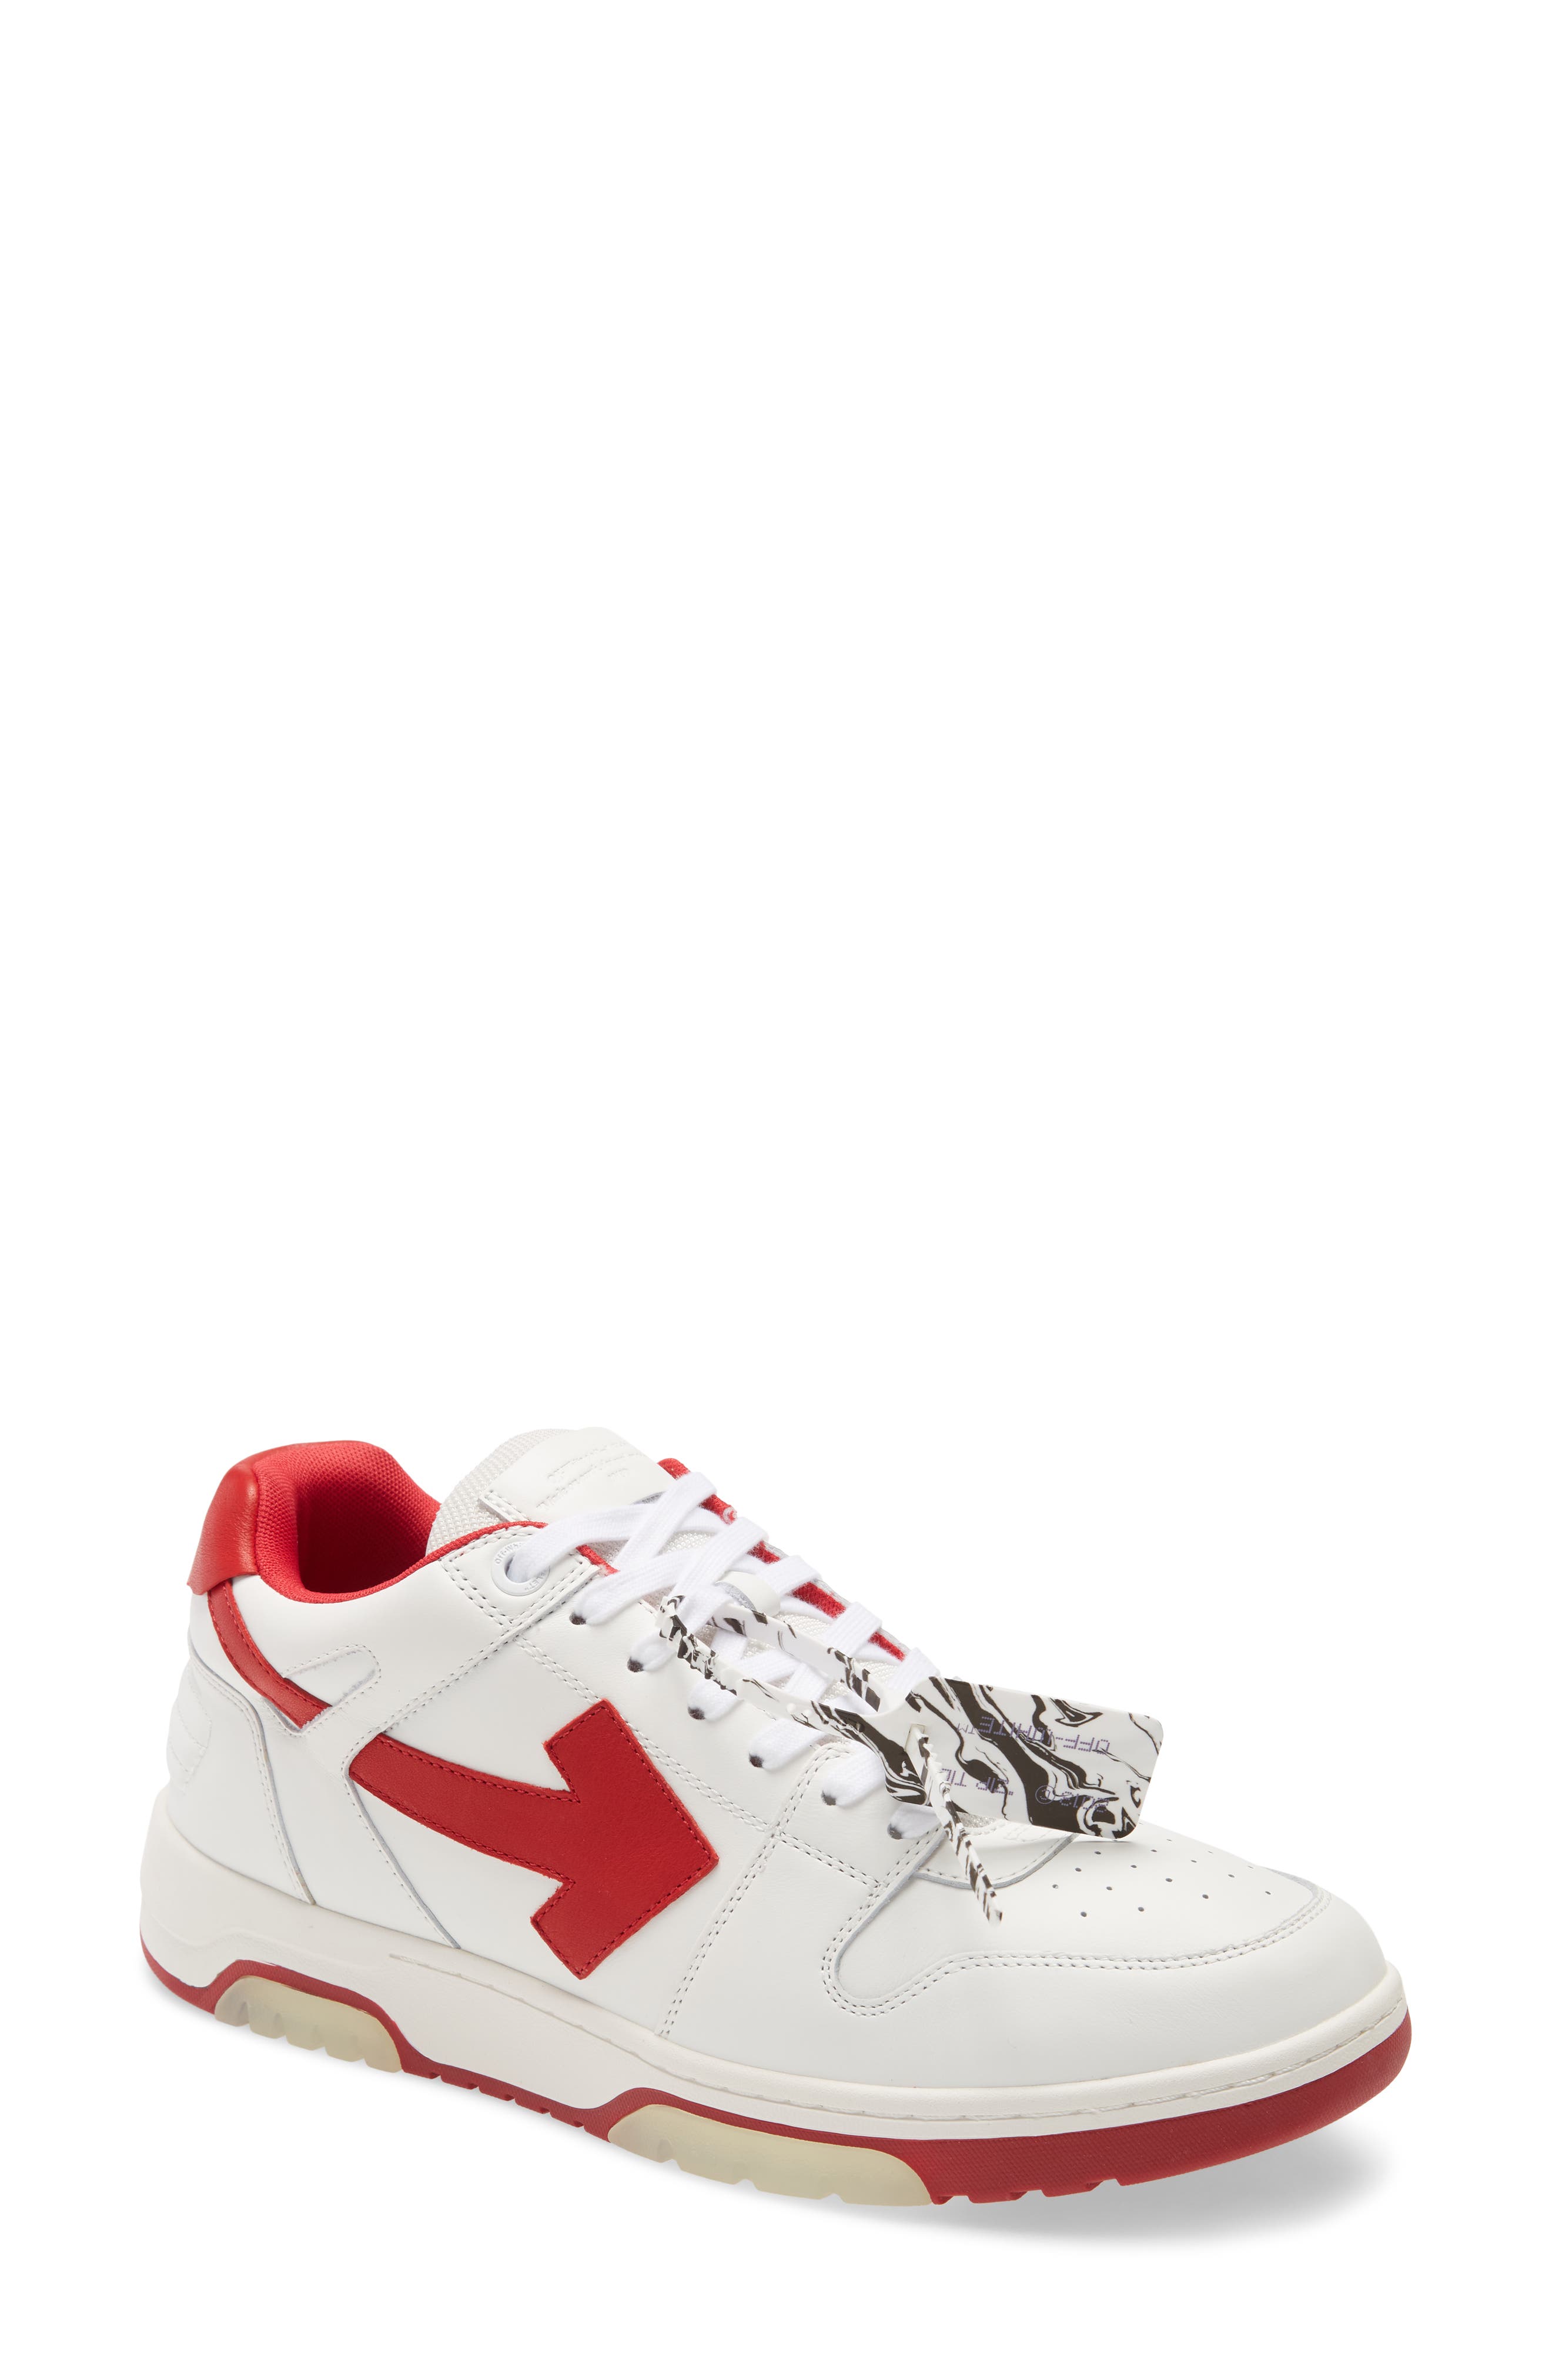 off white sneakers mens